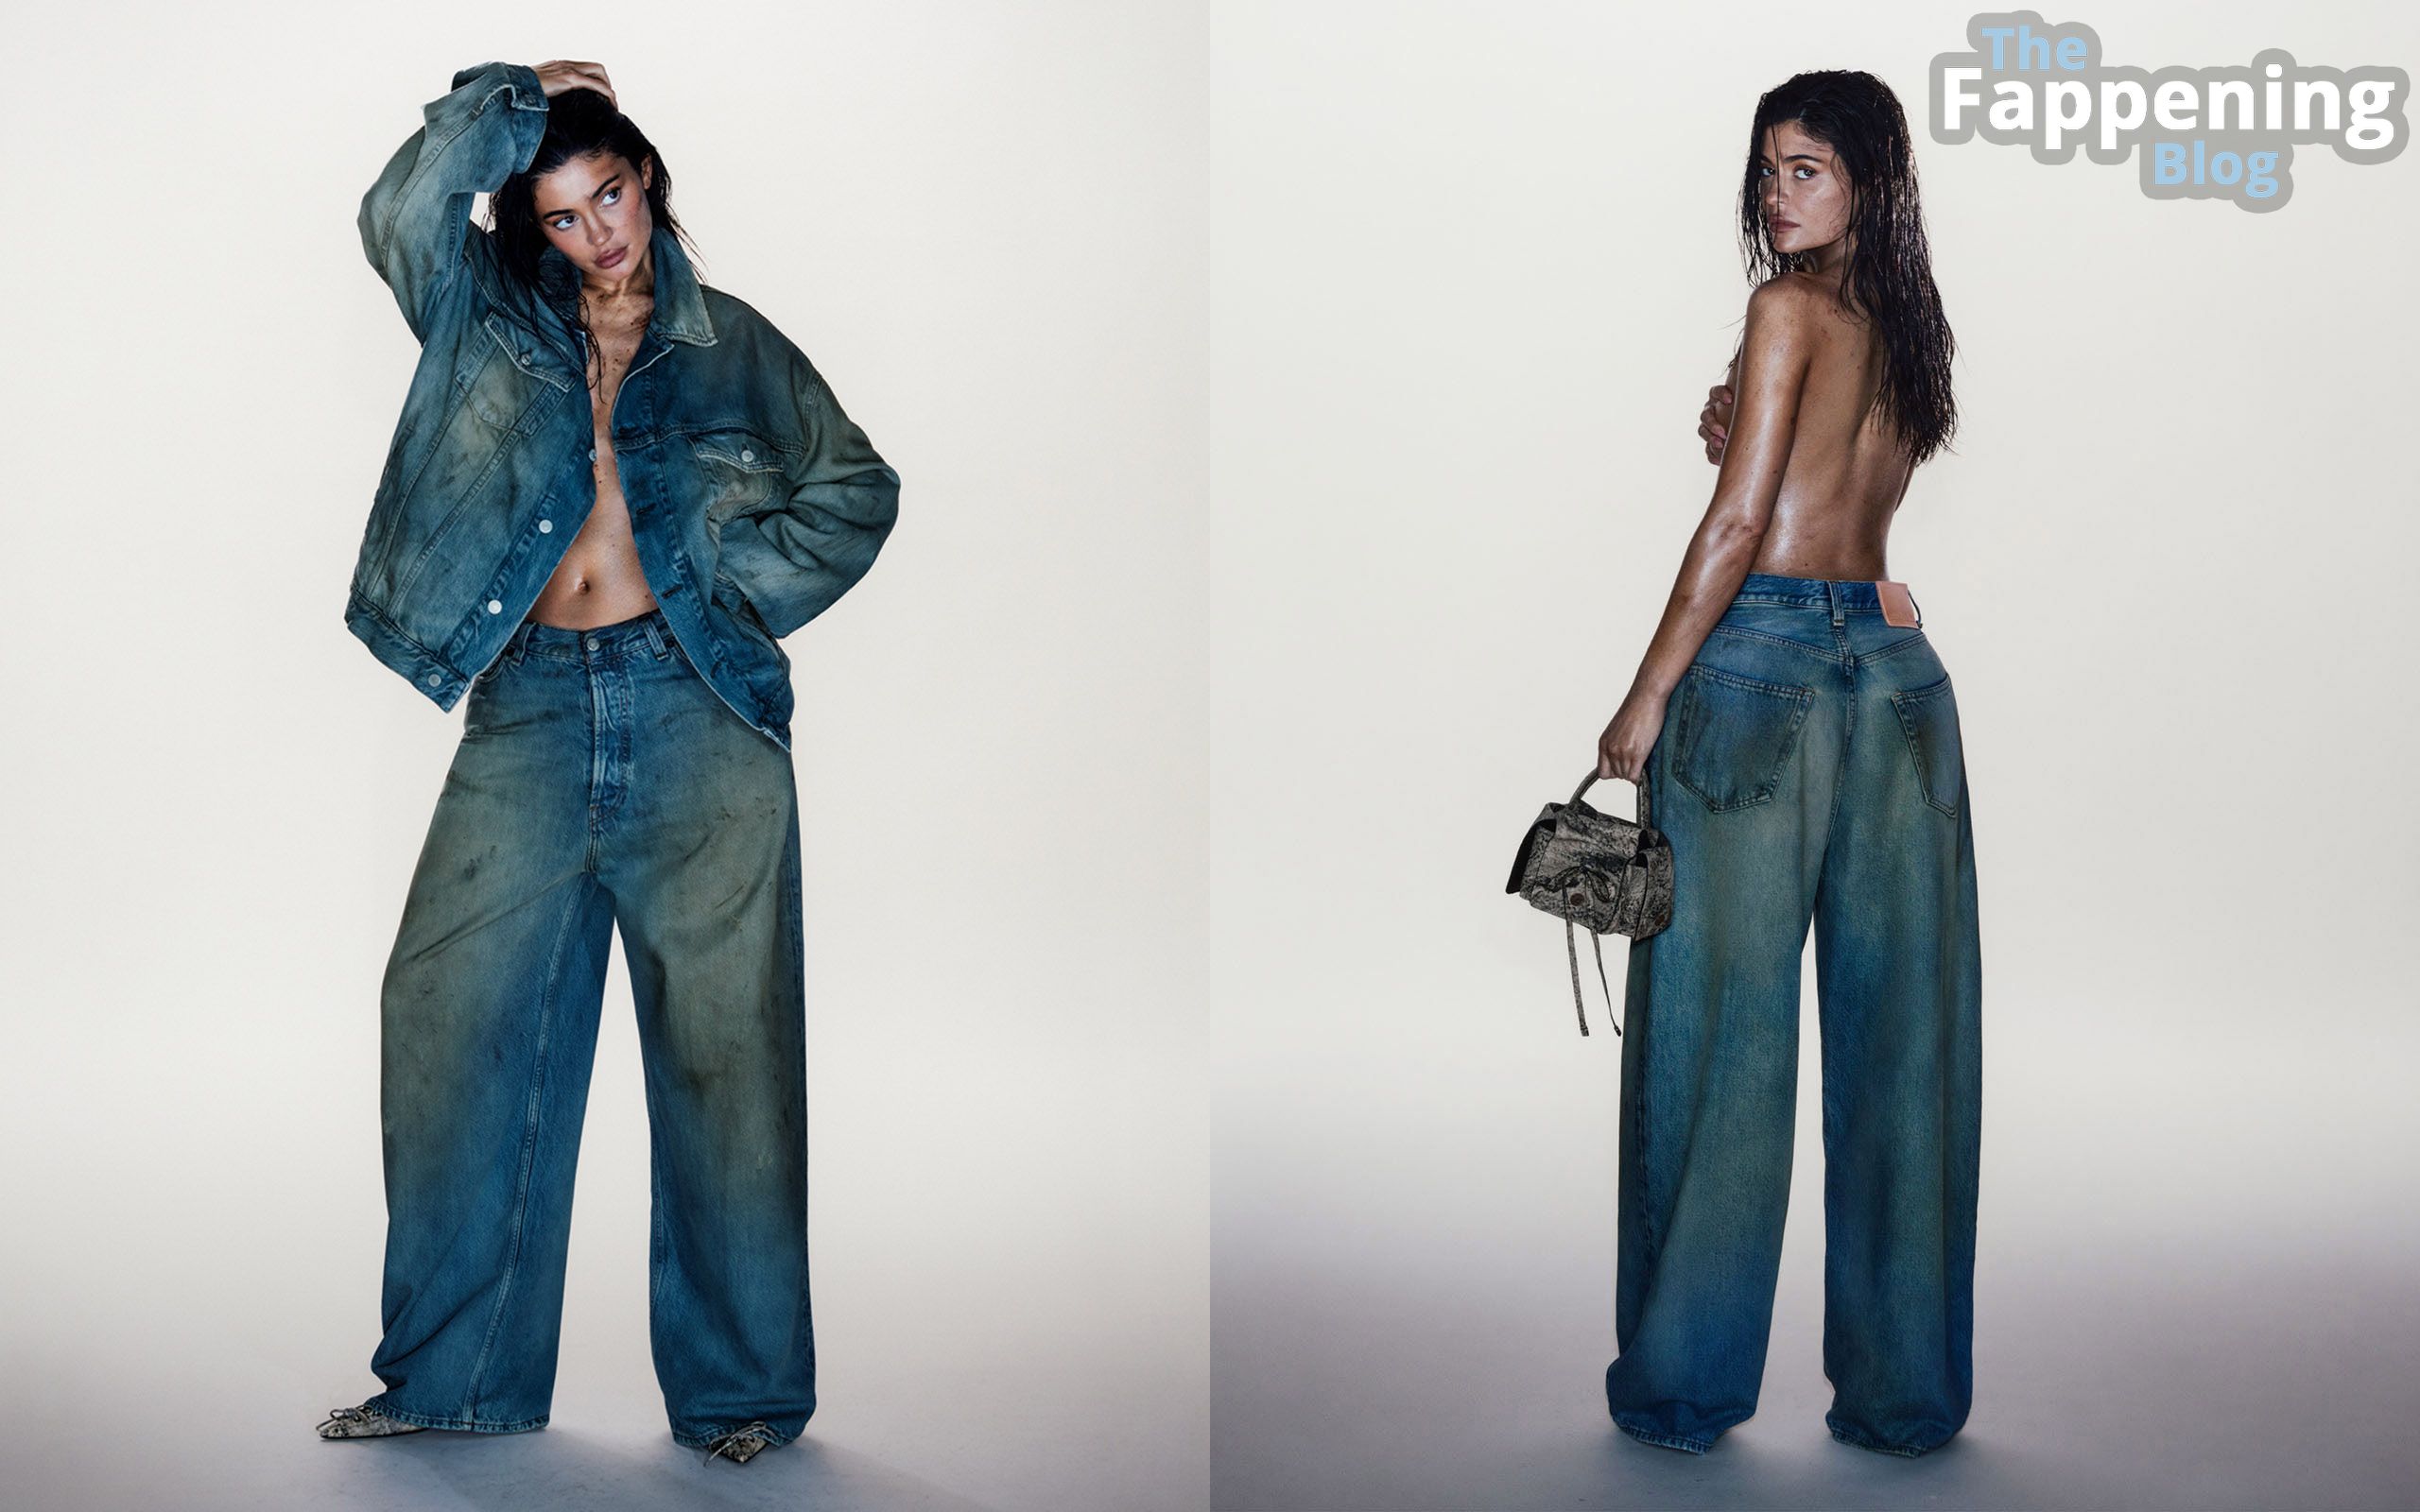 Kylie Jenner Poses Topless For Acne Studios (9 Photos + Video)